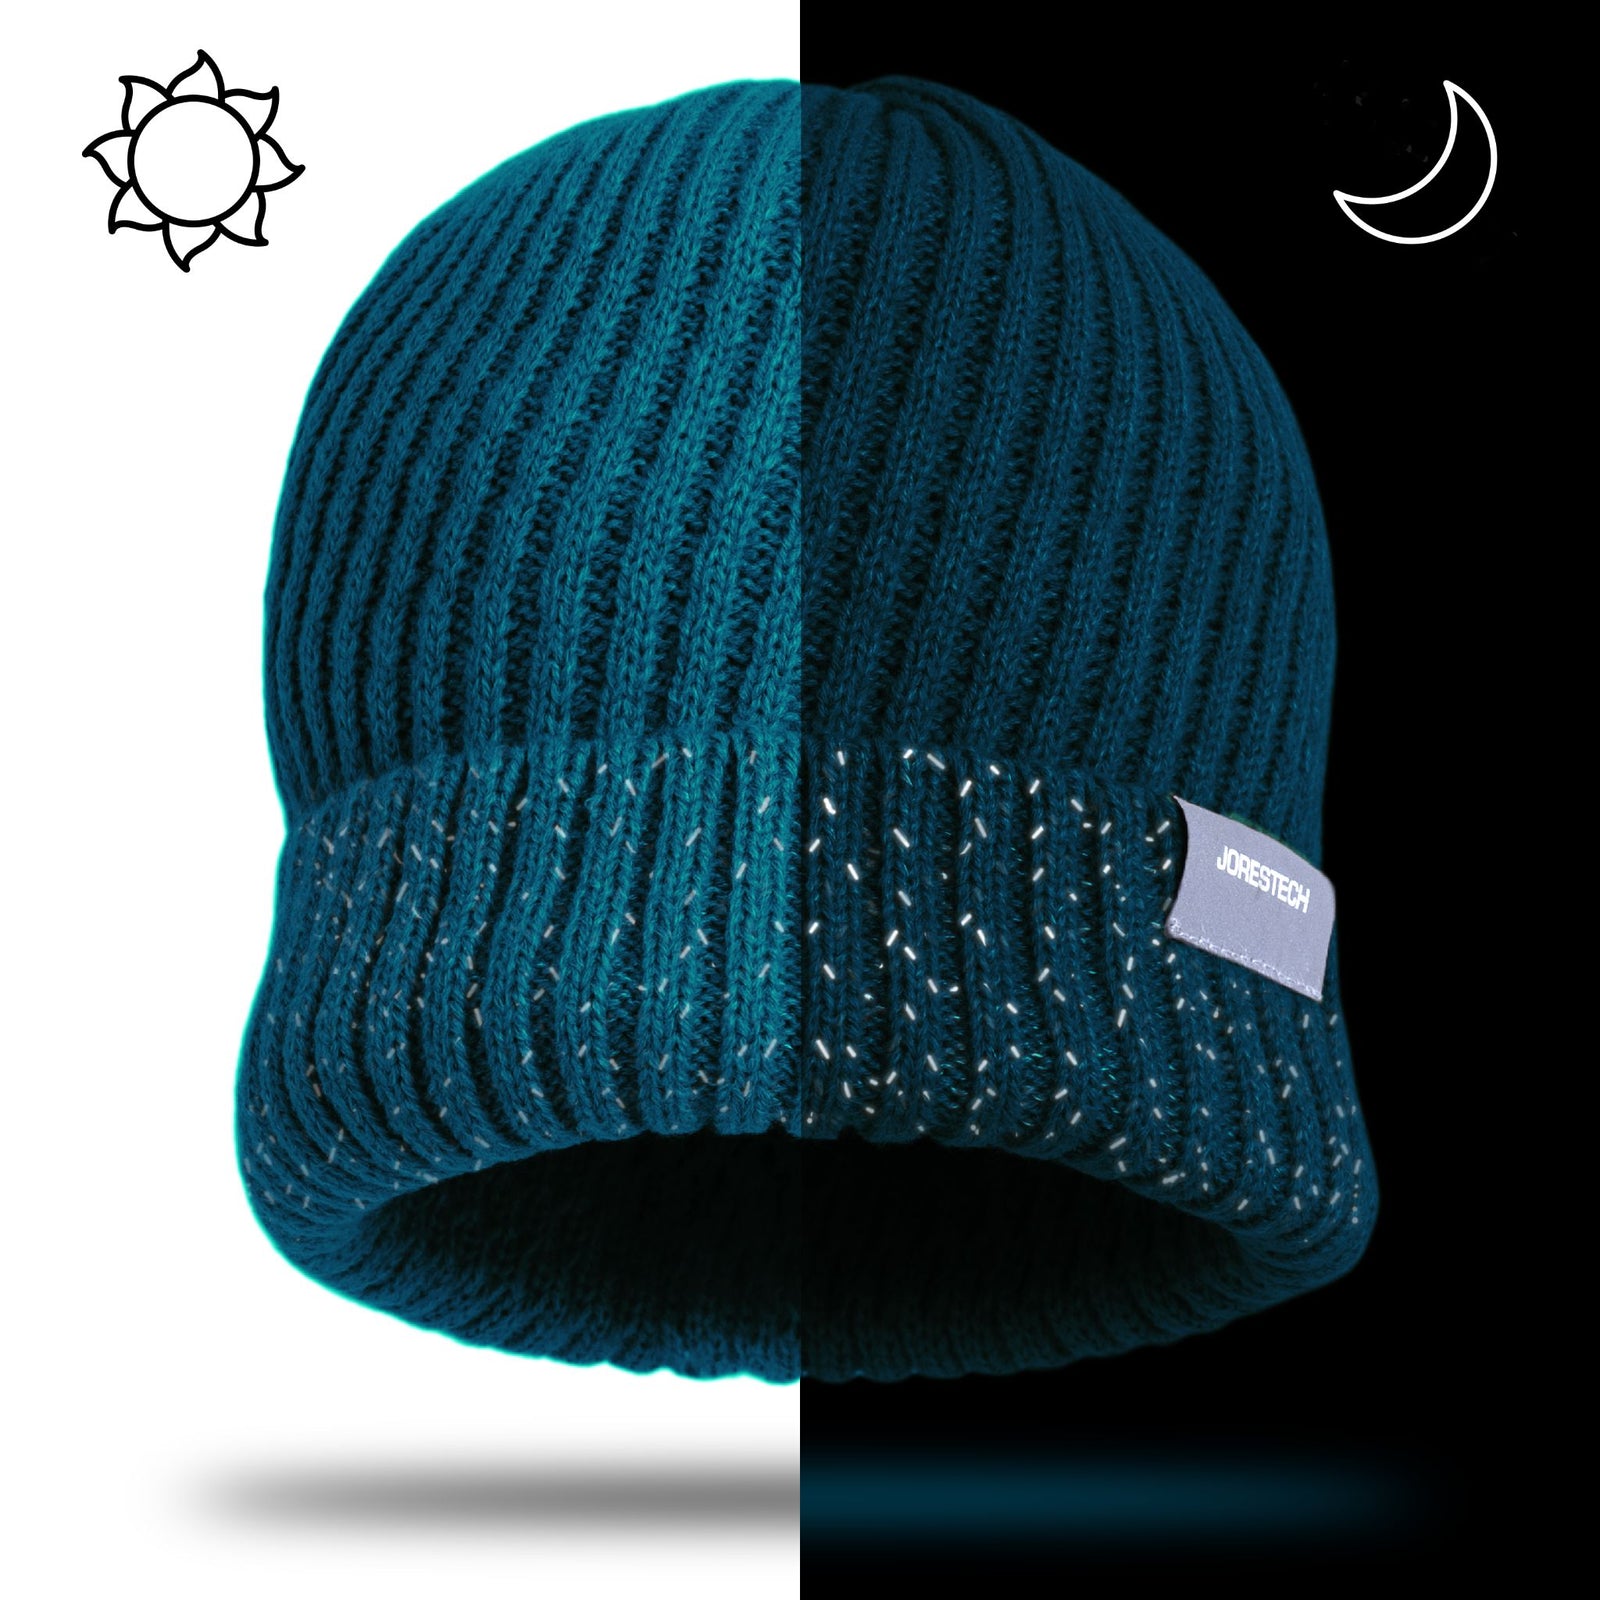 Comparison how does the beanie look during day and nighttime